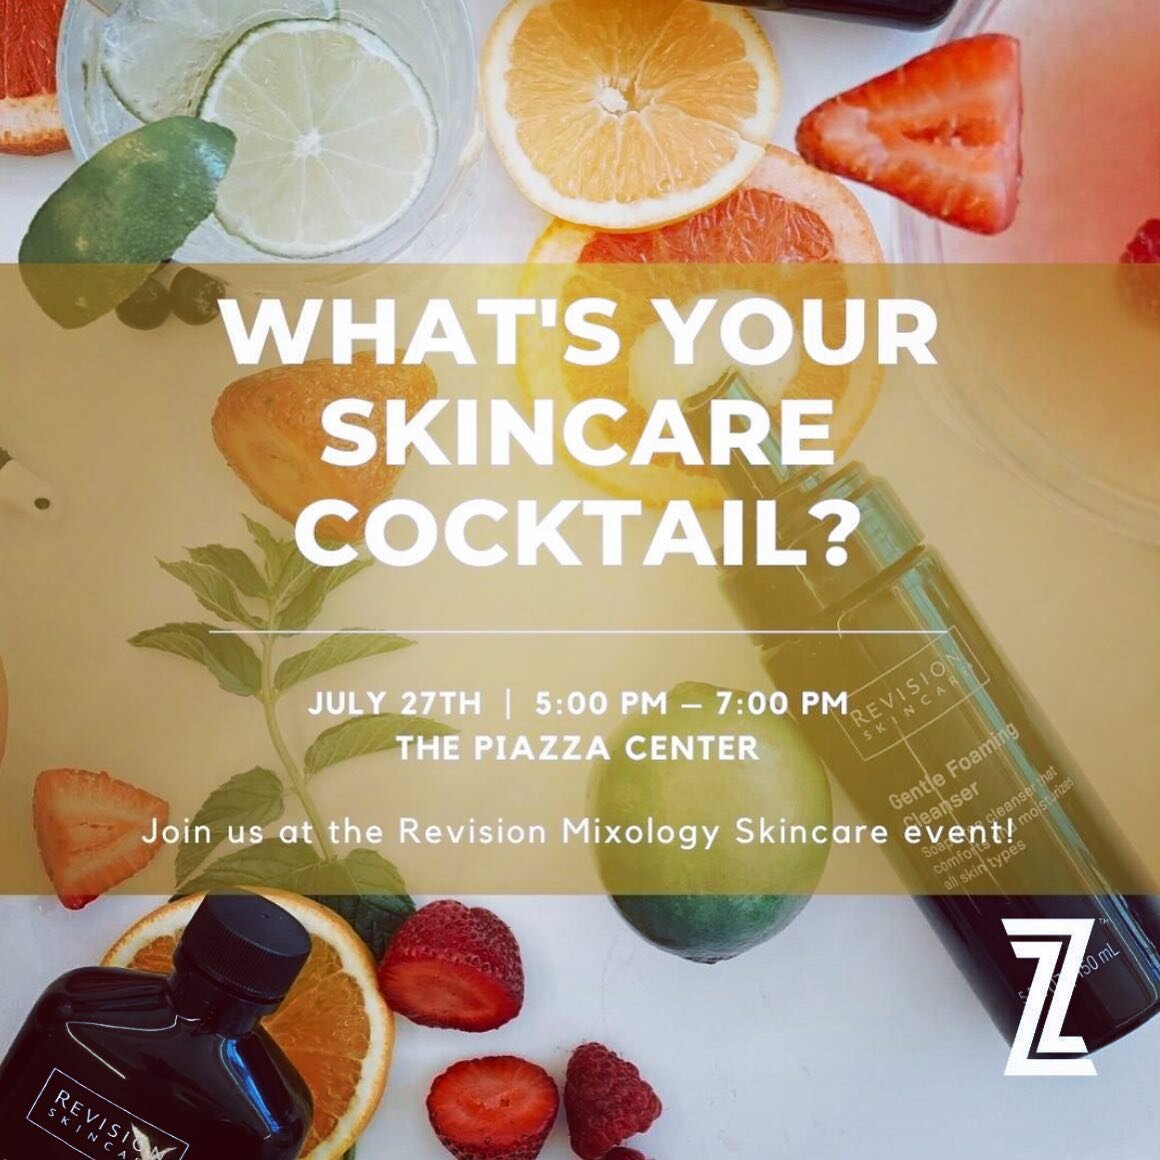 You are invited!! 

To our first ever
Revision Skincare Mixology Event! Join us
Wednesday, July 27th, to learn how you can mix,
match, and layer Revision Skincare products to create your own personalized skincare cocktail.

Did you know that all of R